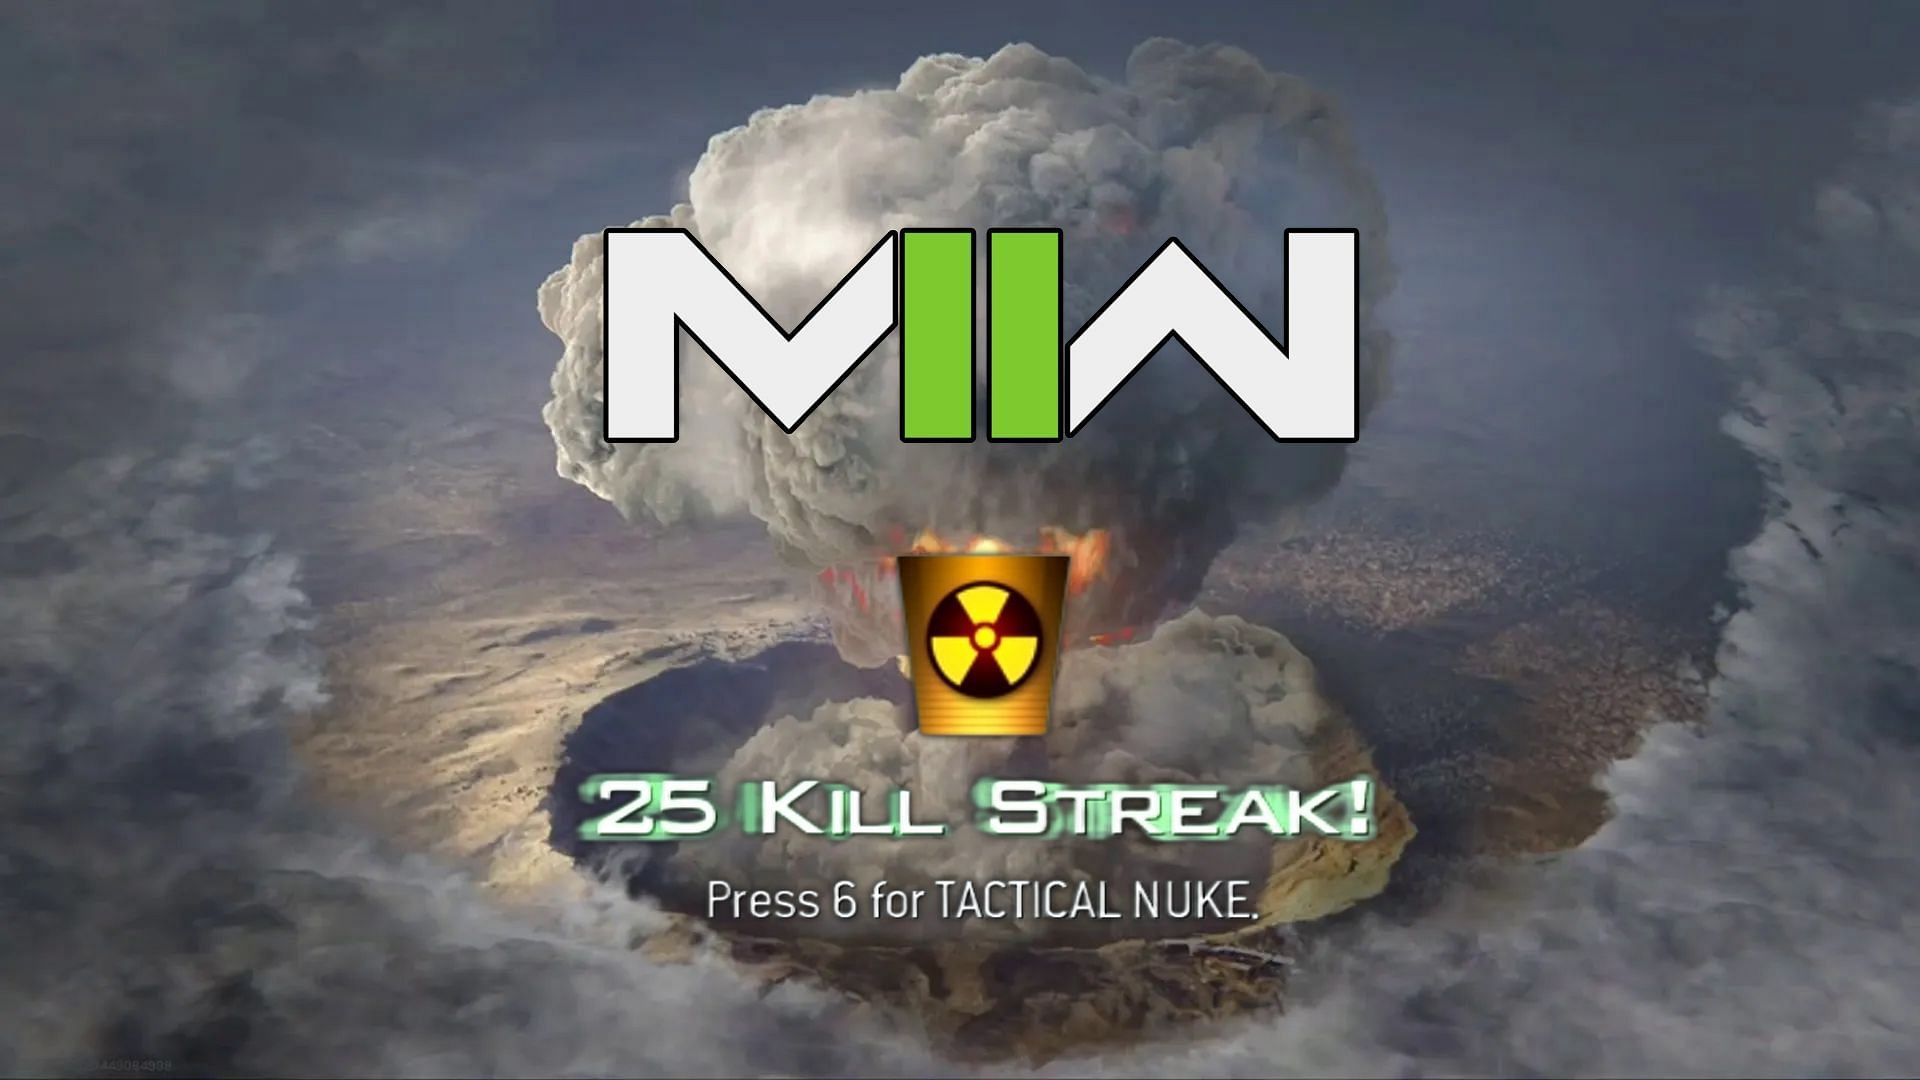 A tactical nuke going off in the background. An MW2 logo and a Nuke logo in the center.